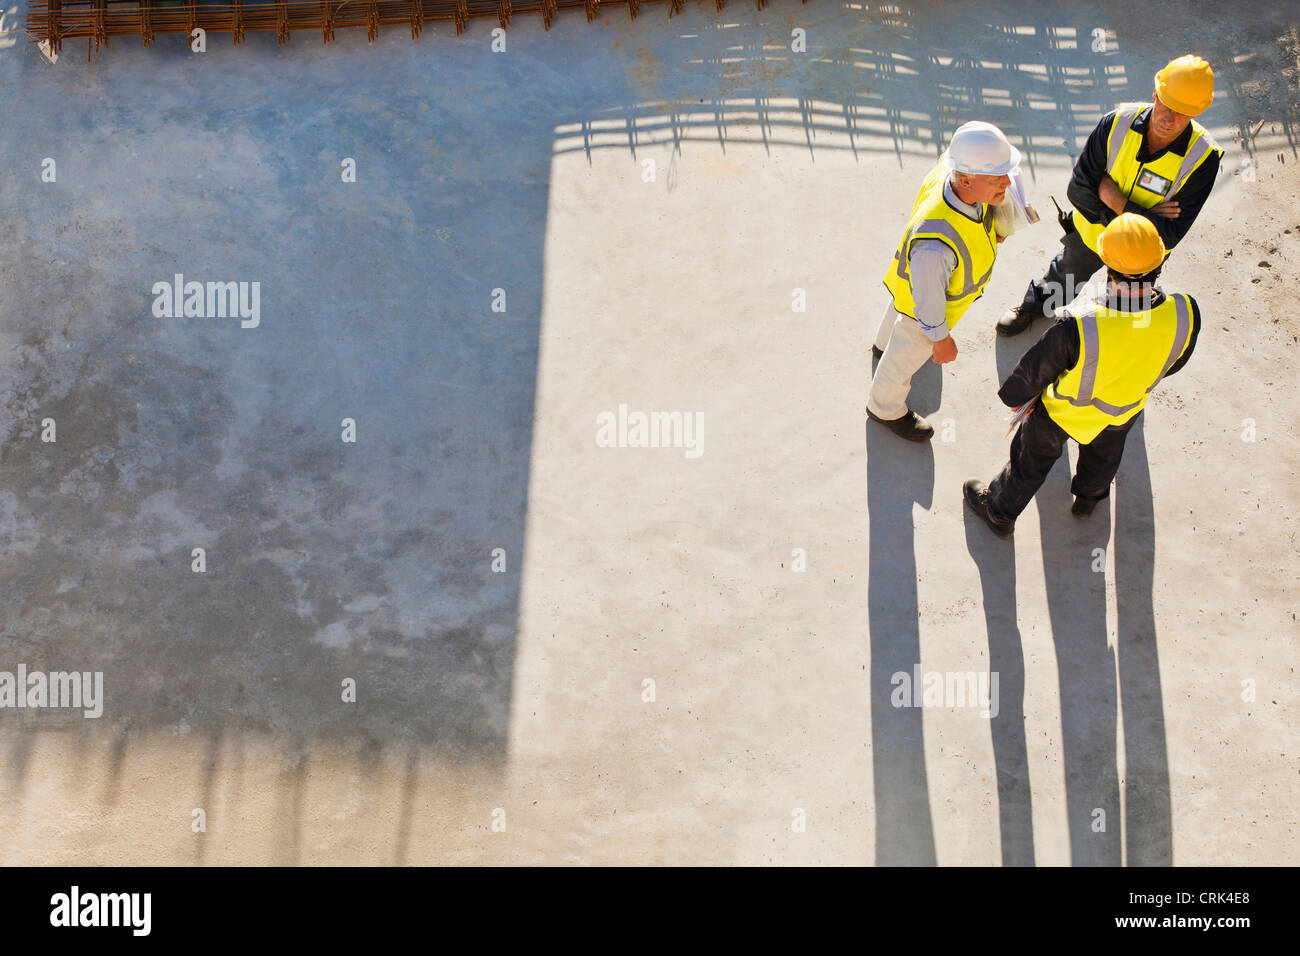 Workers casting shadows on site Stock Photo